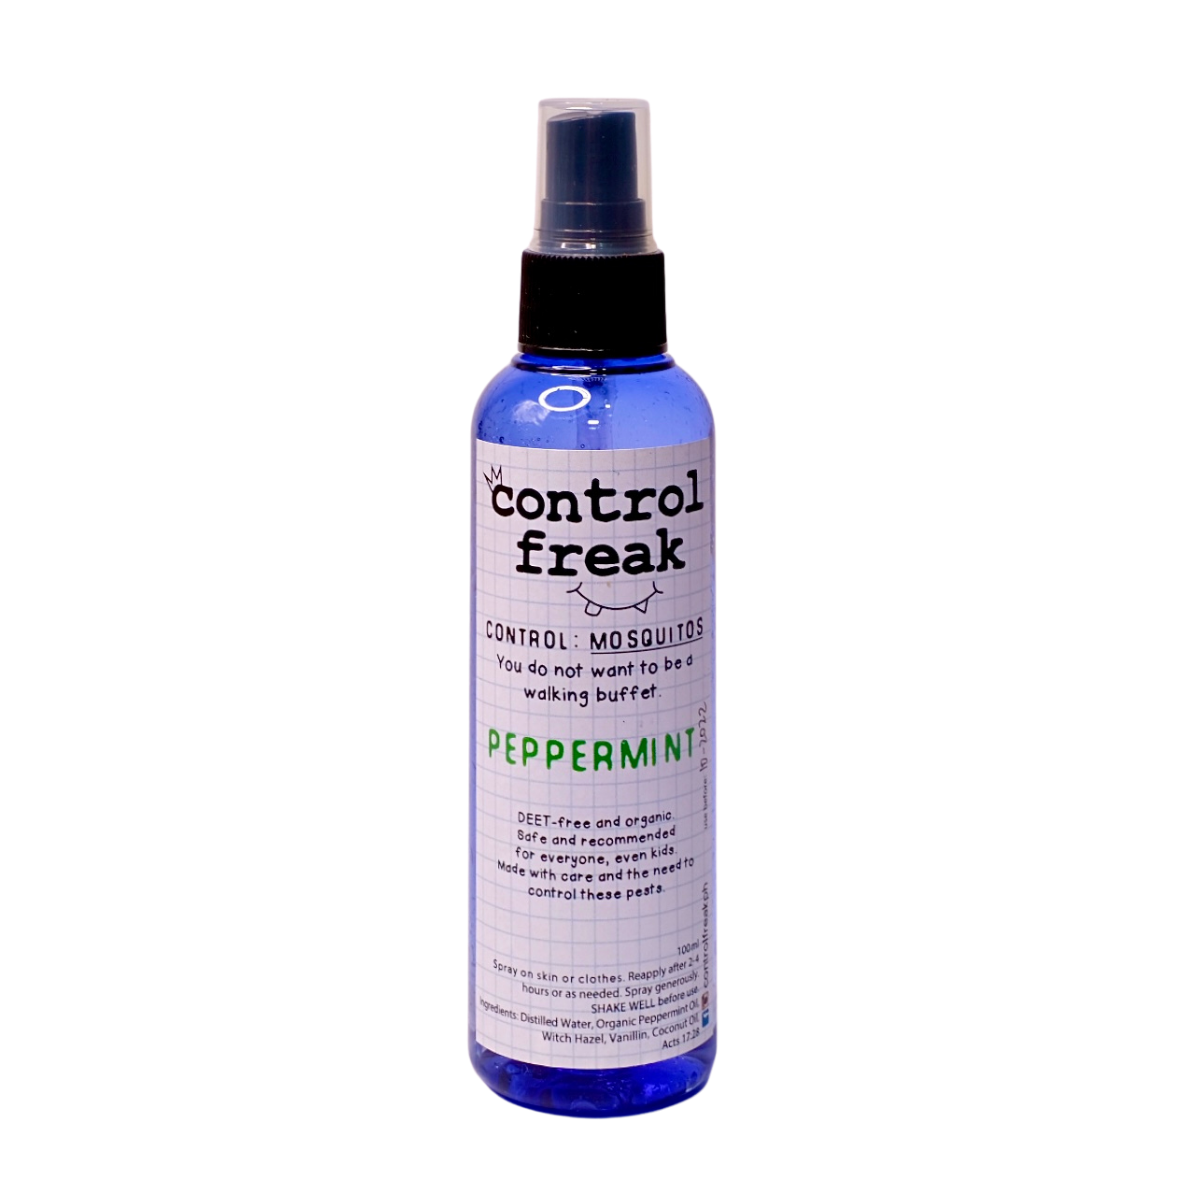 Control Freak Peppermint Mosquitoes Control 100ml